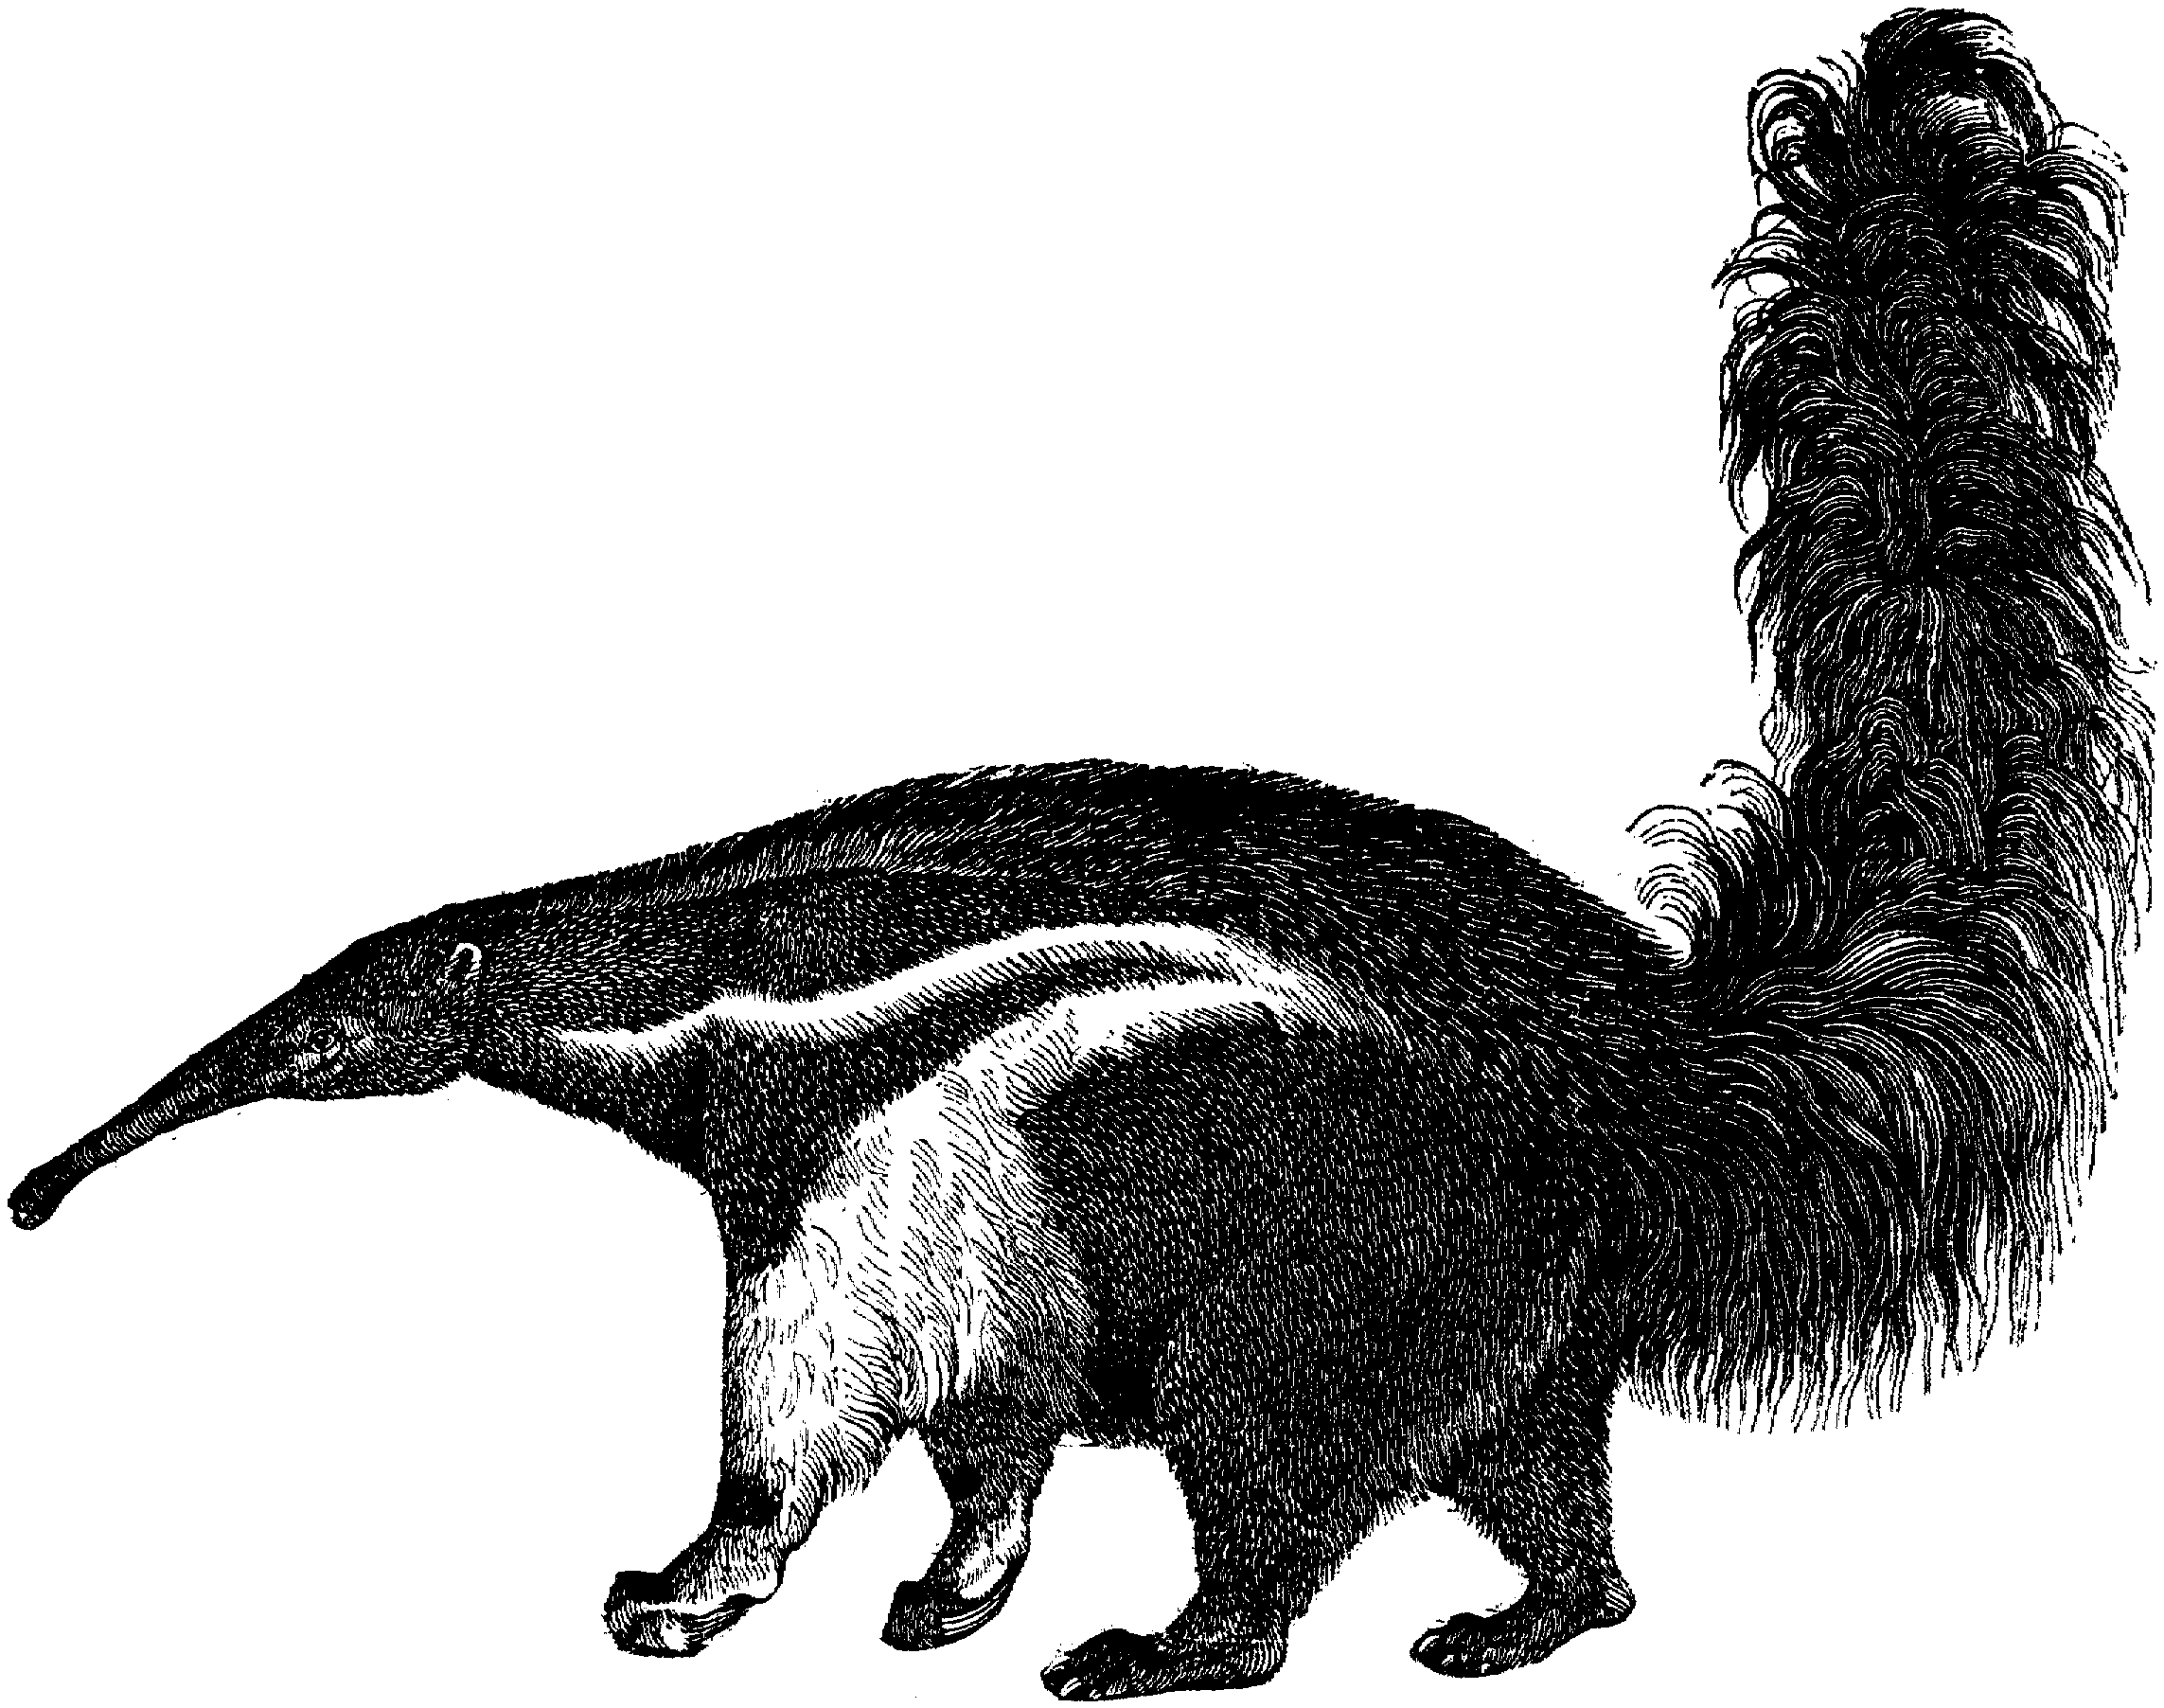 Anteater clipart #3, Download drawings